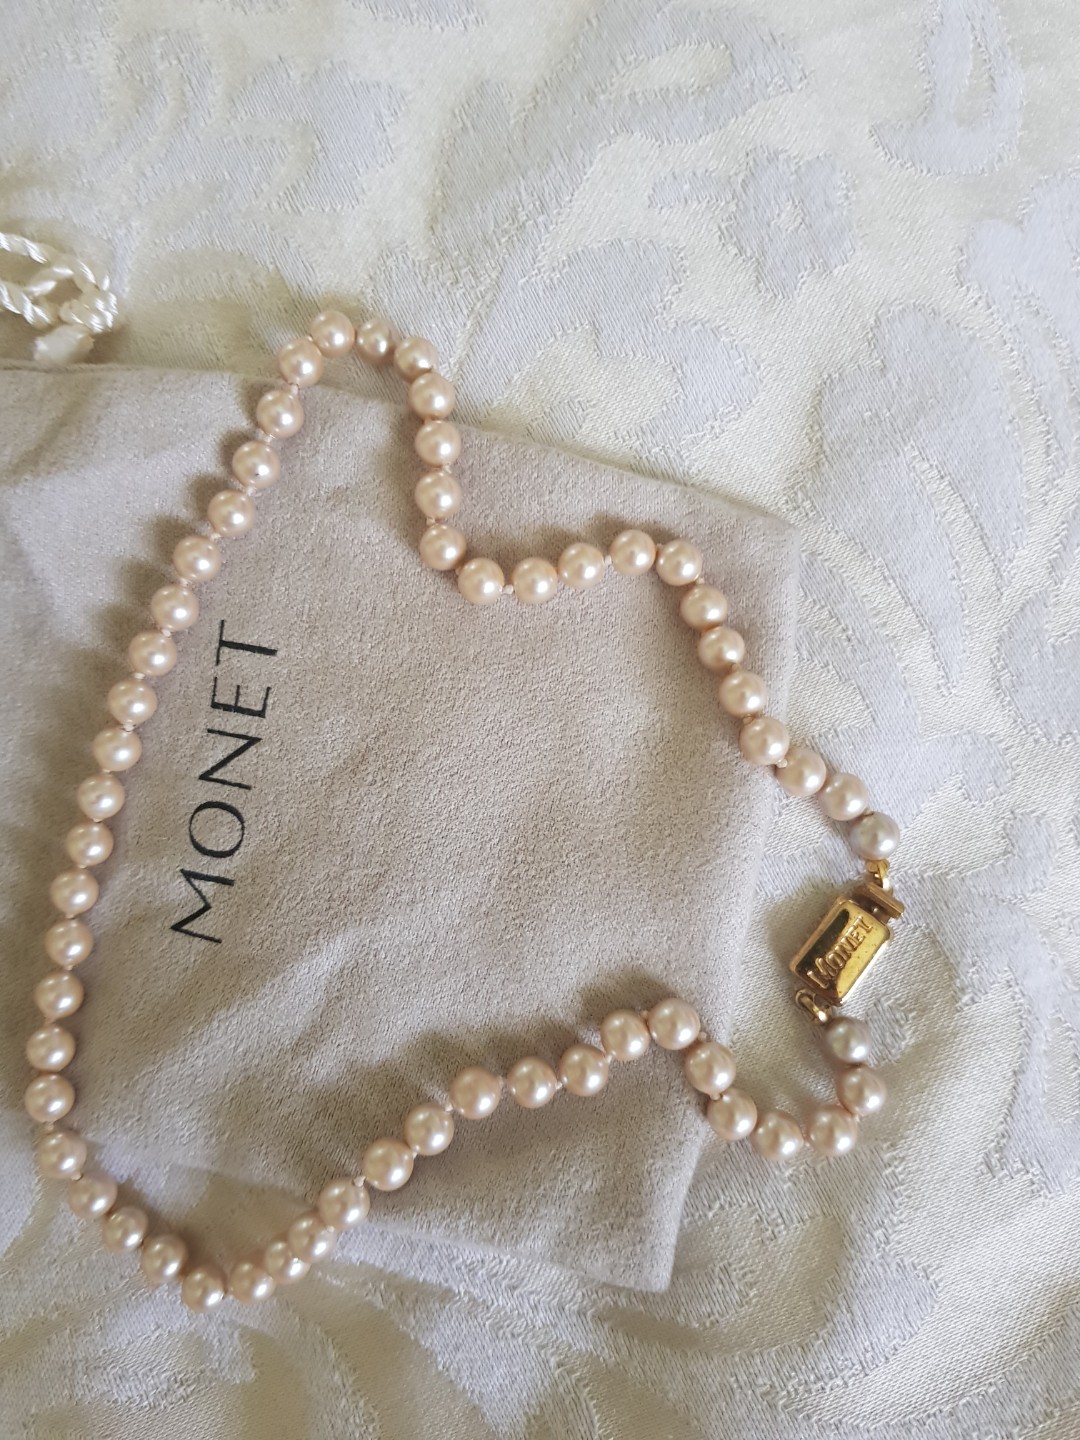 Sold at Auction: Lot of 3 Vintage Costume Monet Pearl Necklaces